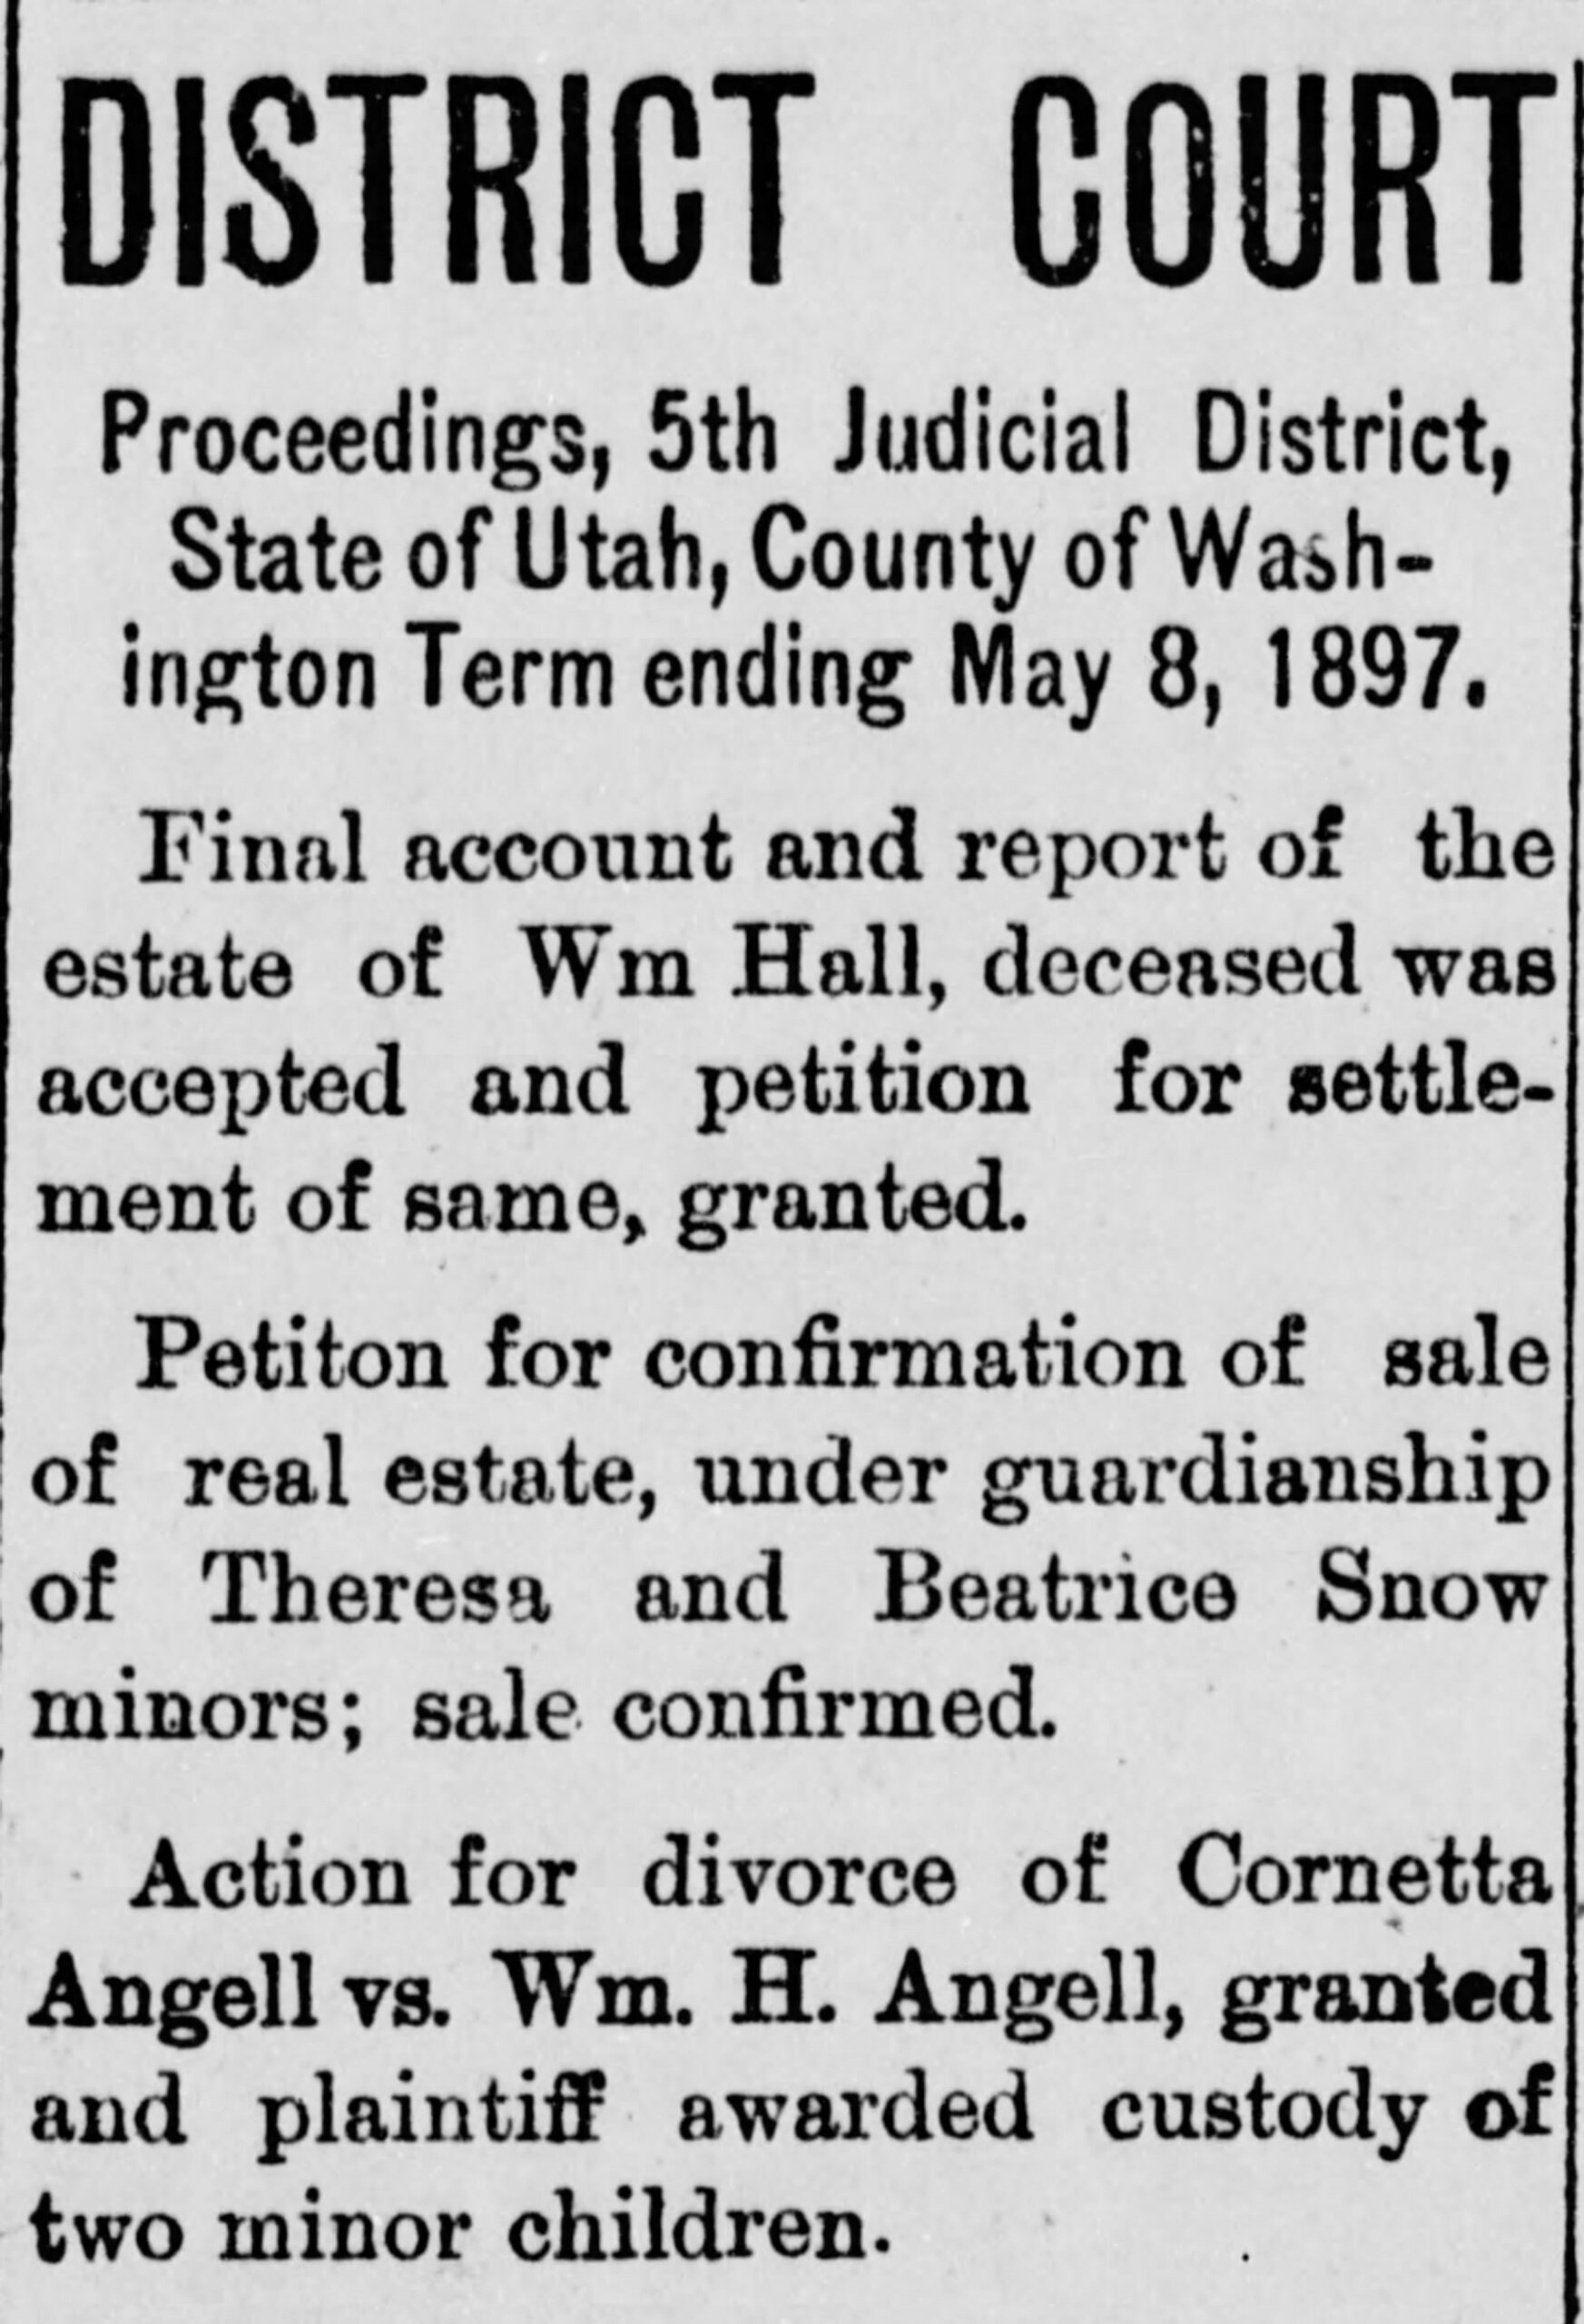 Proceeding of the 5th Judicial District of the State of Utah, term ending 8 May 1897.